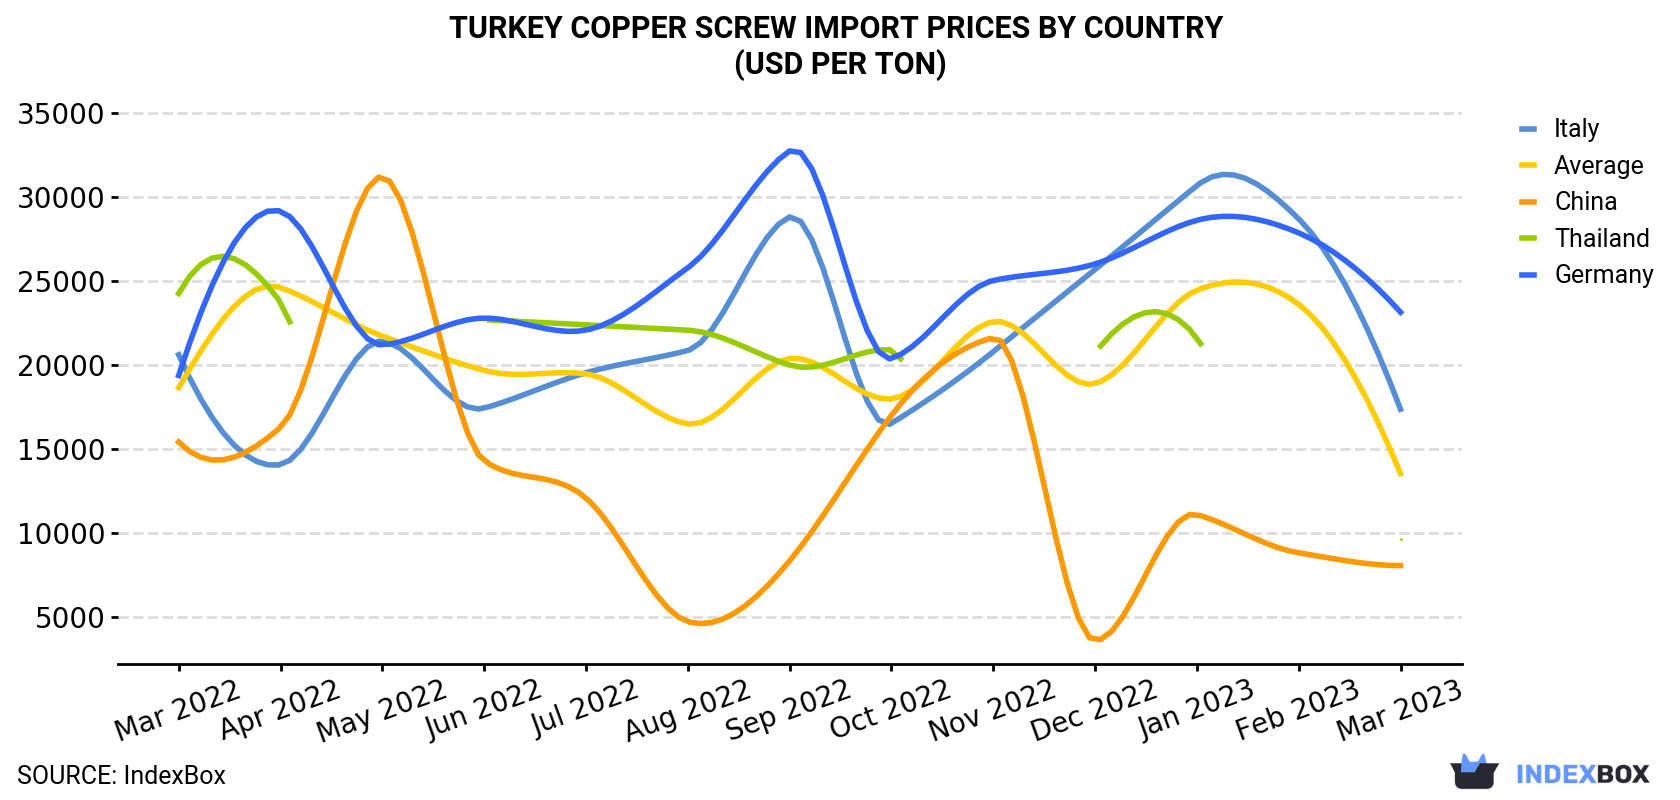 Turkey Copper Screw Import Prices By Country (USD Per Ton)